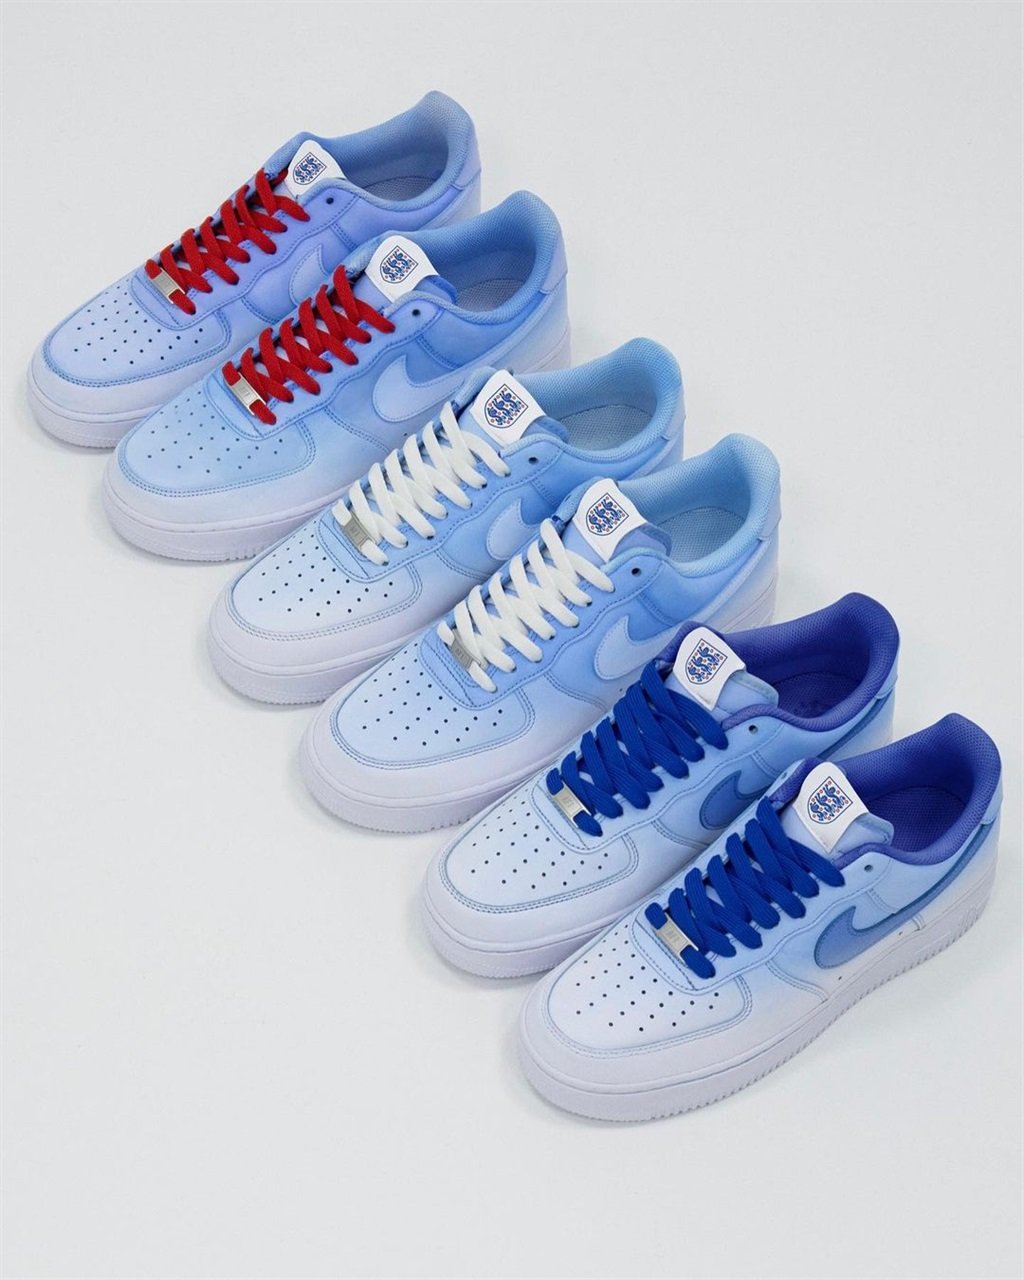 England Players Wear Exclusive Customised Nike Sneakers For The